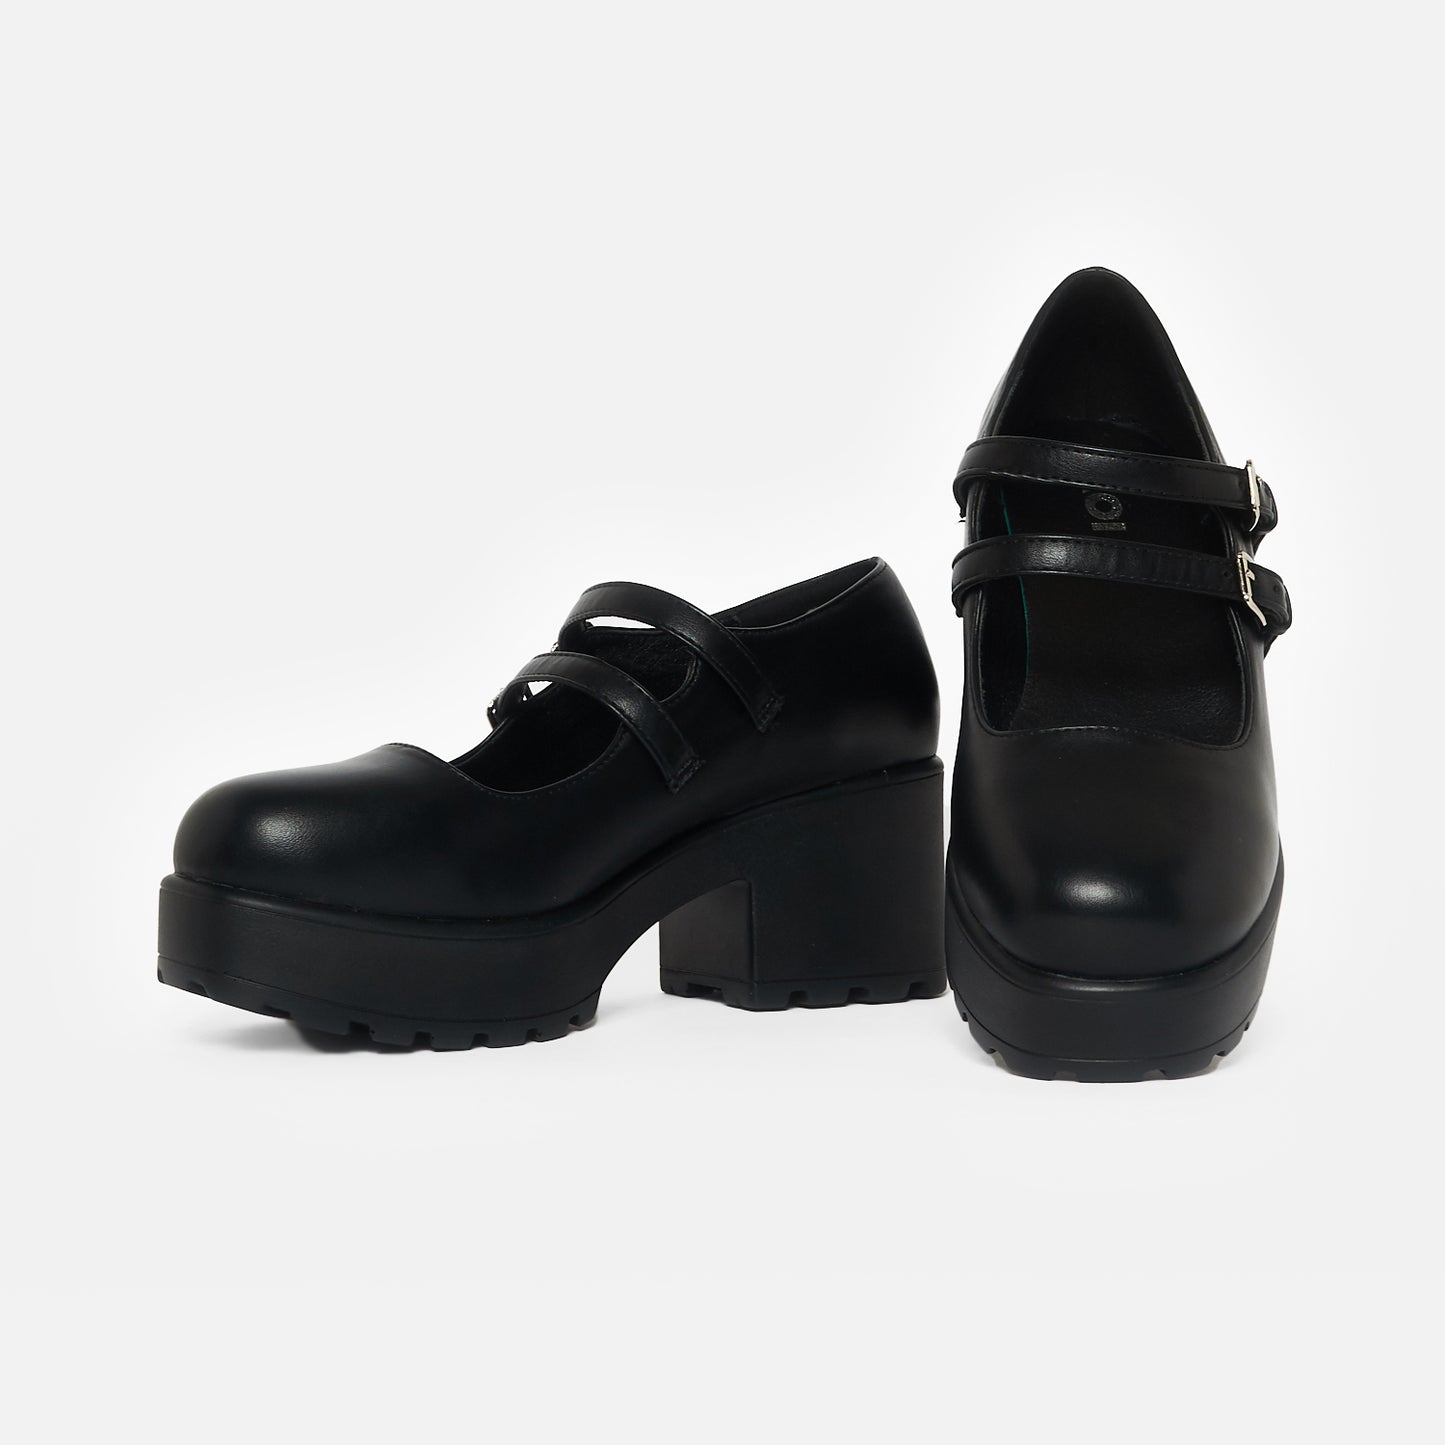 Mura Double Strap Shoes - Mary Janes - KOI Footwear - Black - Front and Side View